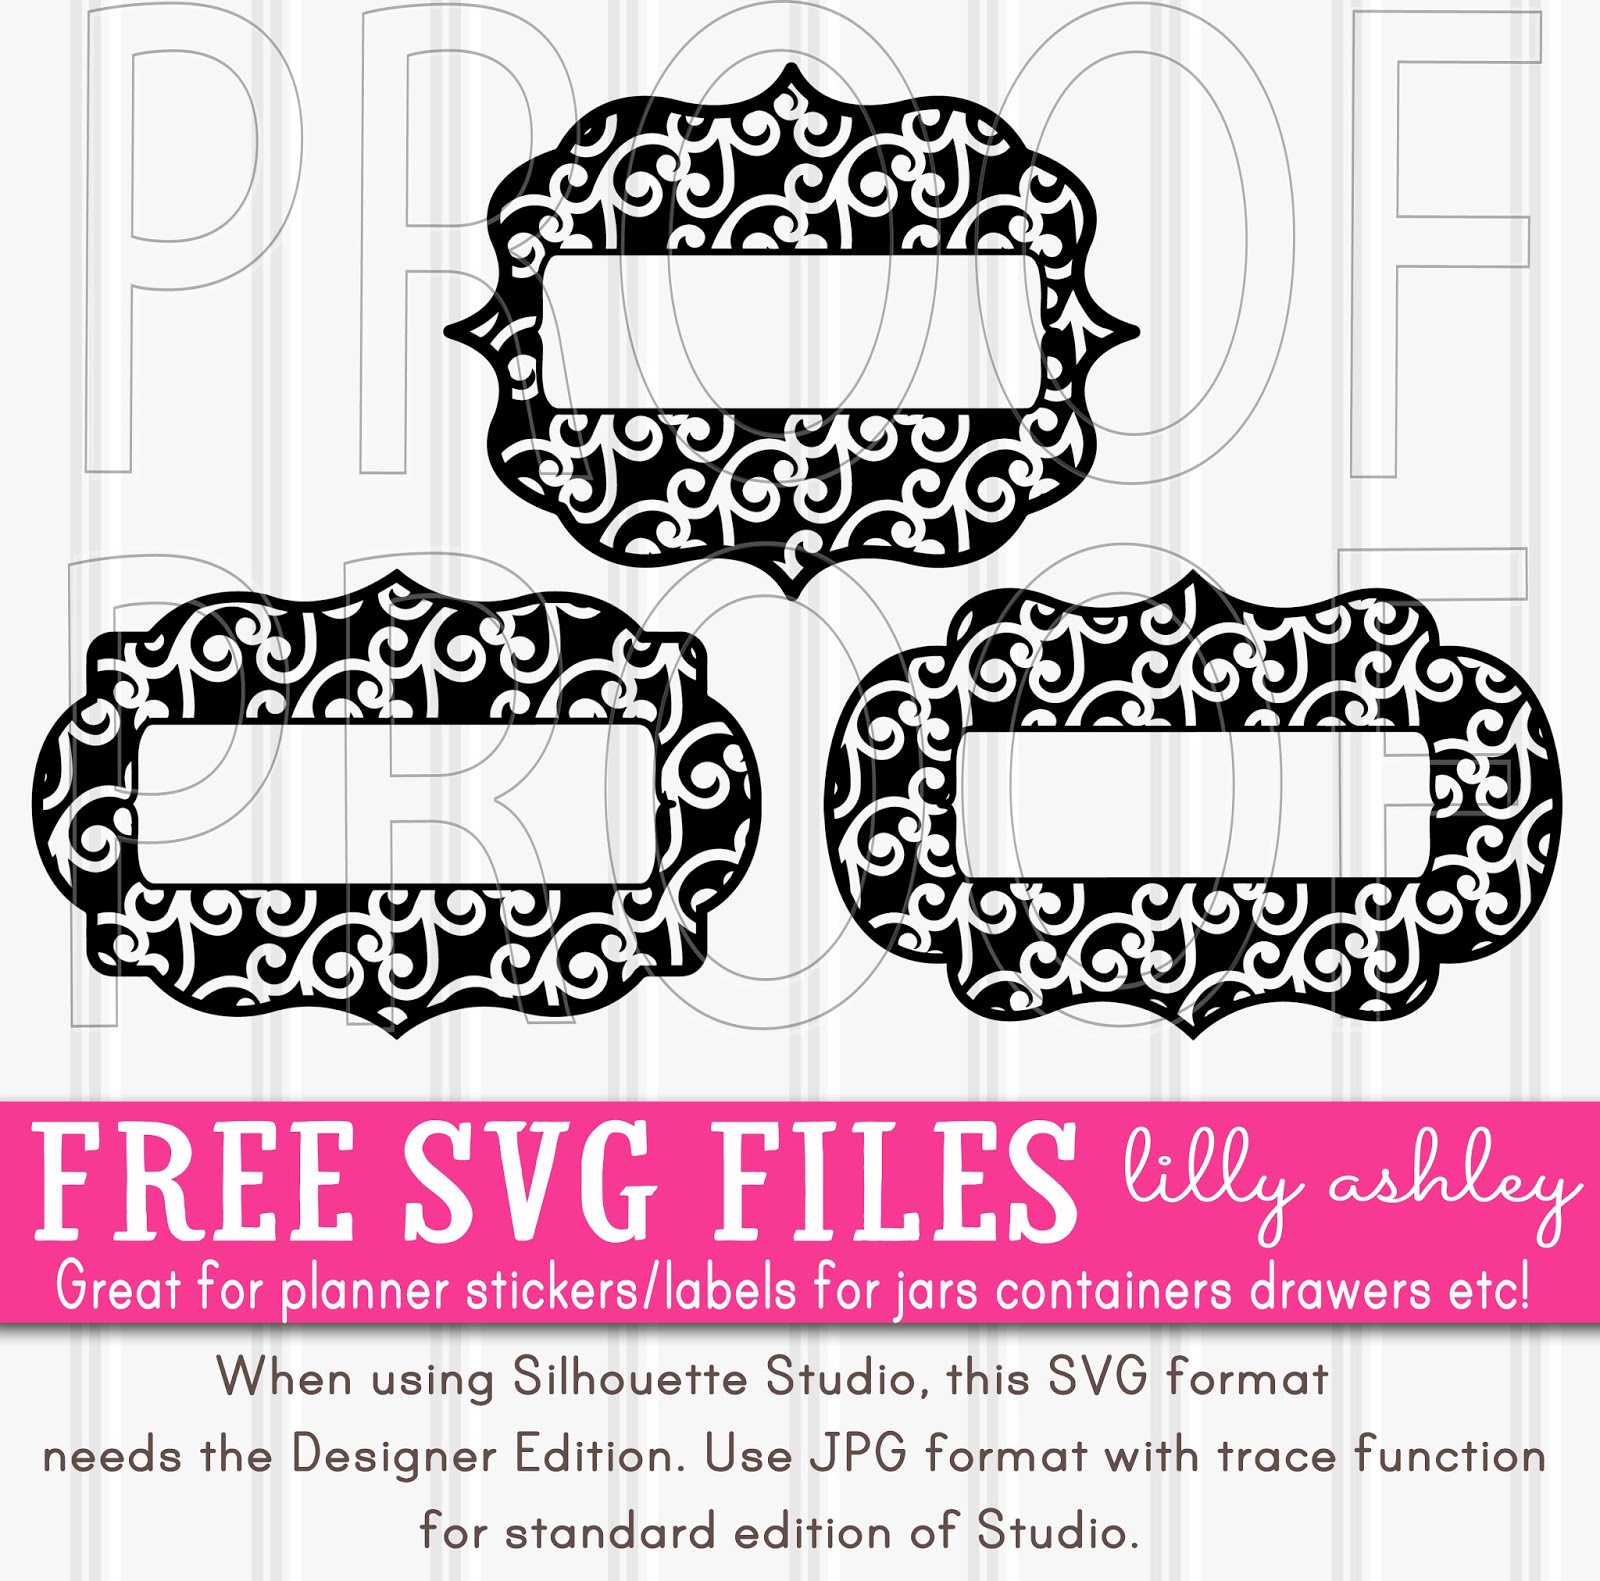 Make it Create...Free Cut Files and Printables Free SVG Files for